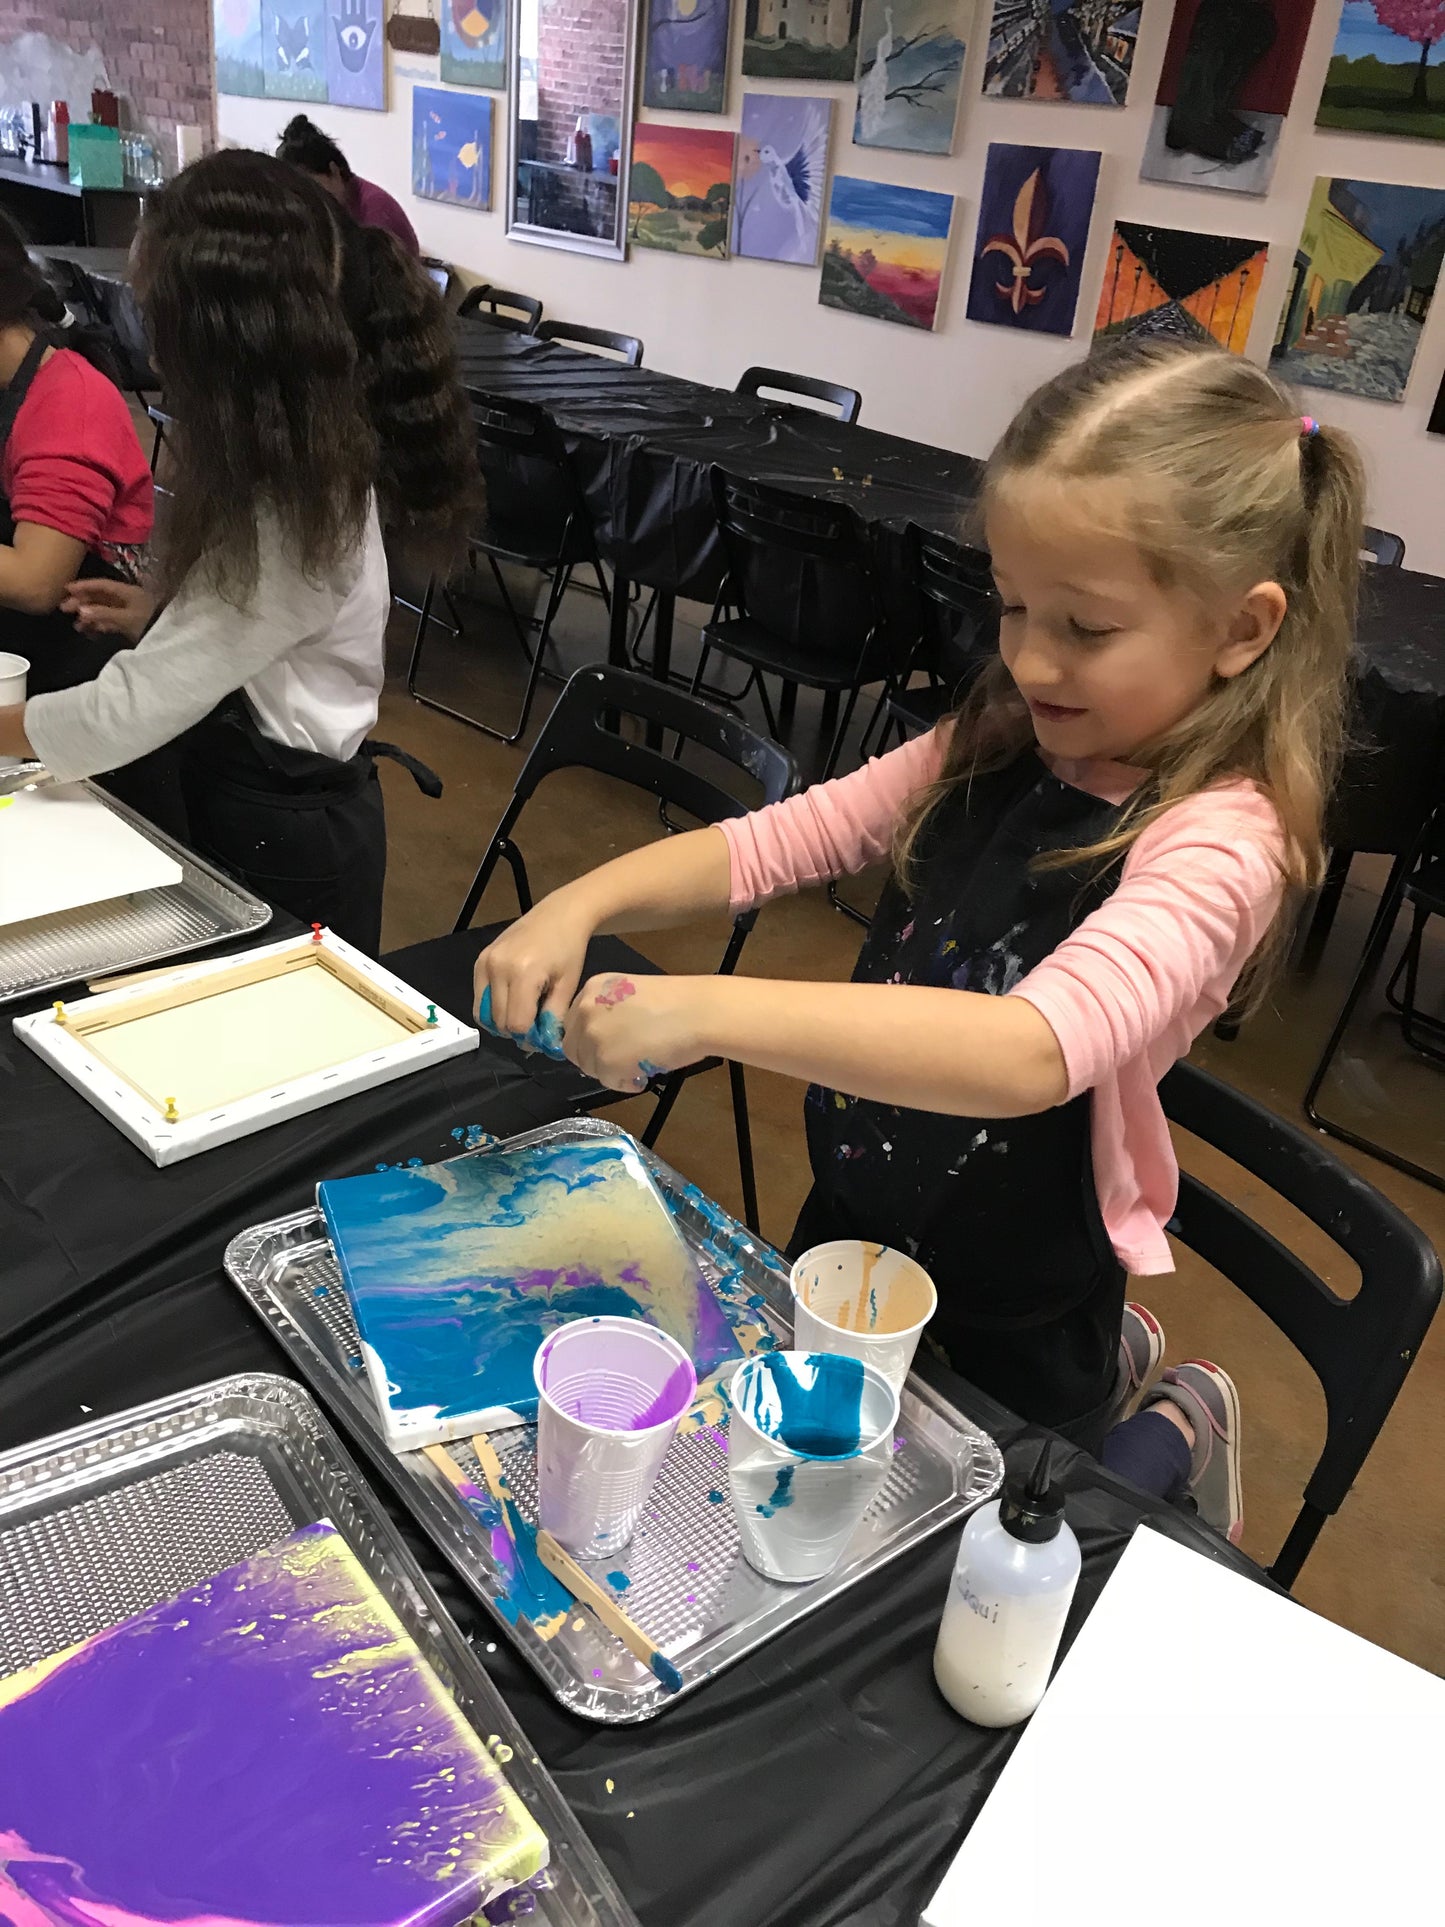 Sun, Oct 17, 1-3p “Art & Science: Acrylic Pour” Private Kids Painting Party